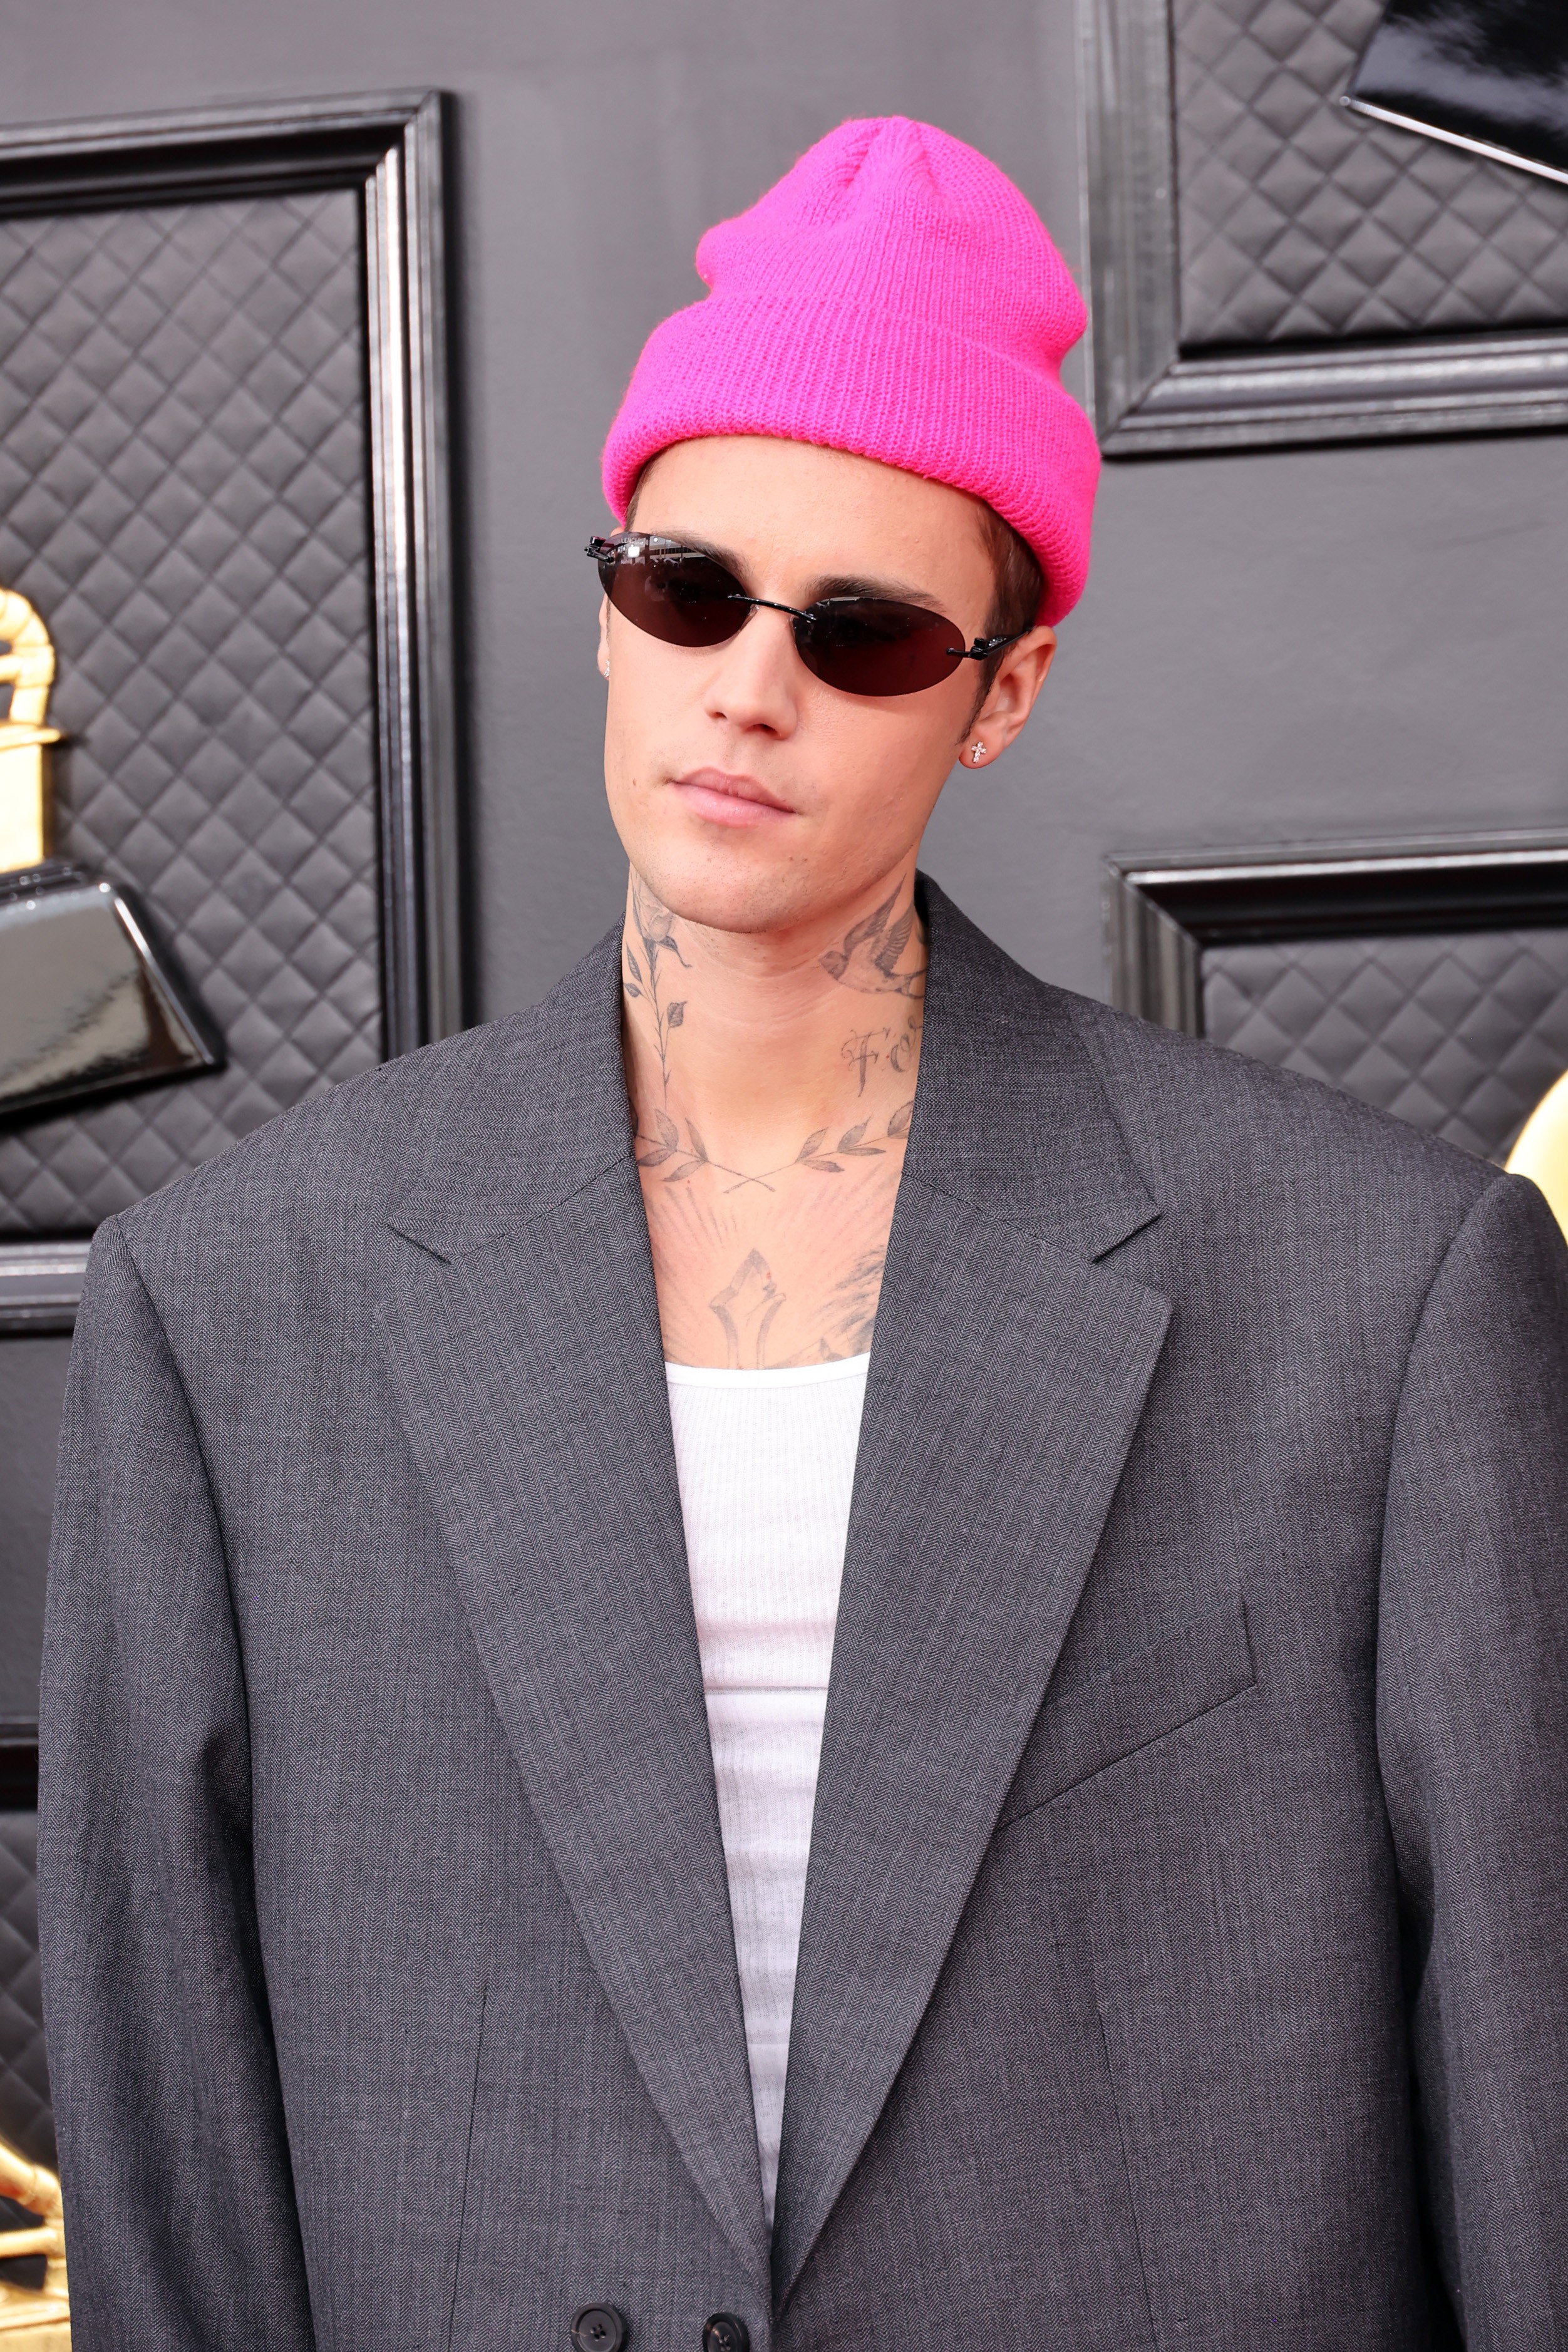 LAS VEGAS, NEVADA - APRIL 03: Justin Bieber attends the 64th Annual GRAMMY Awards at MGM Grand Garden Arena on April 03, 2022 in Las Vegas, Nevada. (Photo by Amy Sussman/Getty Images) (Foto: Getty Images)